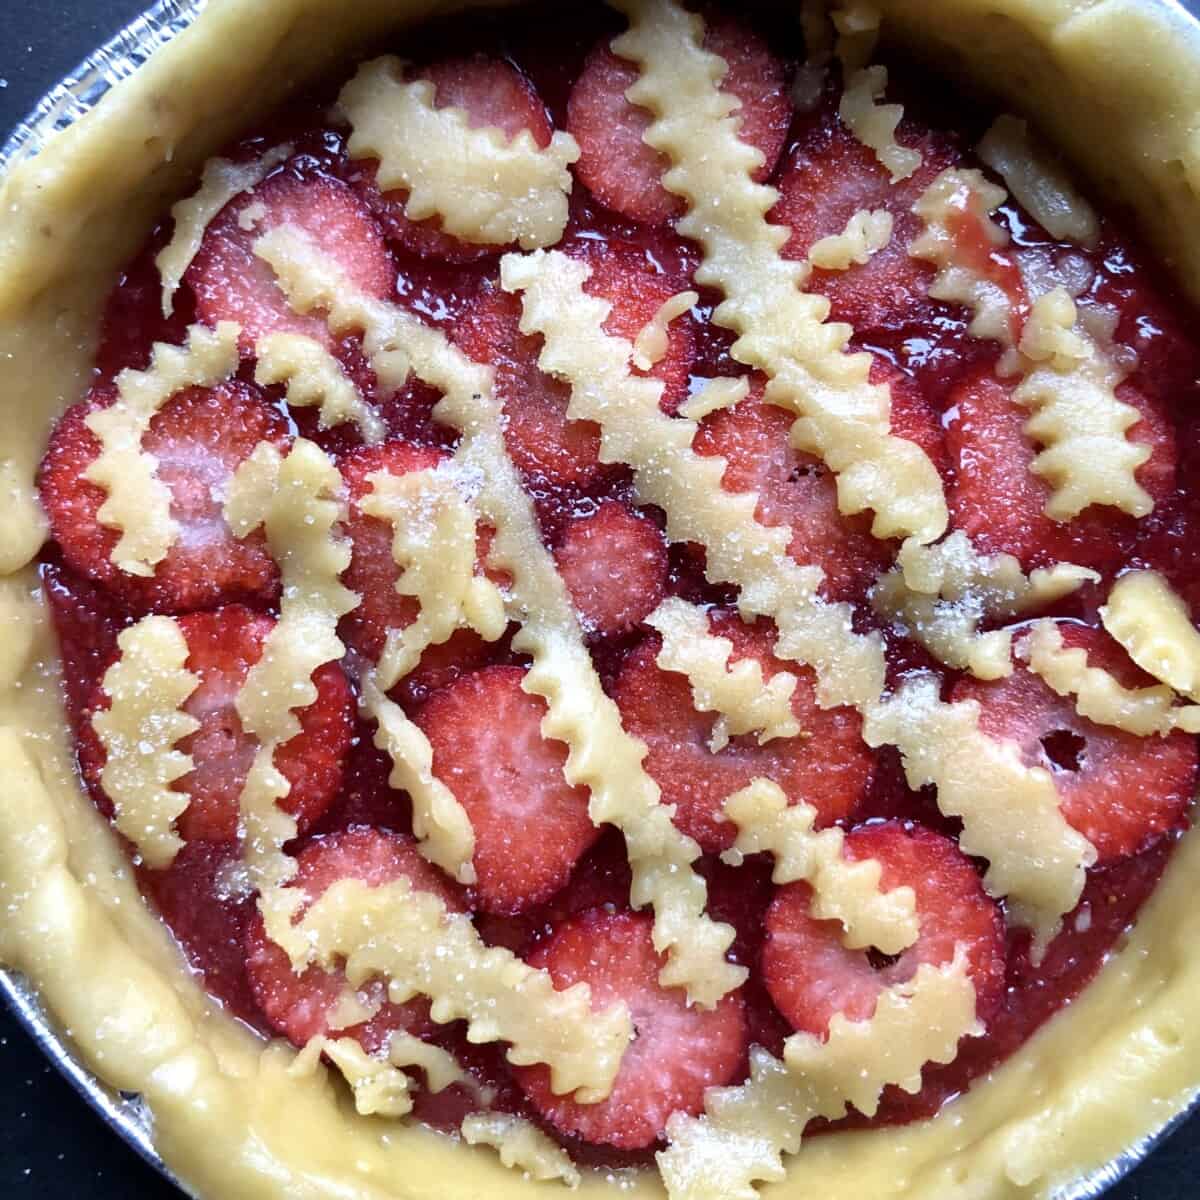 assembled and unbaked strawberry crostata with homemade strawberry jam and fresh sliced strawberries resting under leftover pieces of zigzagged edged lattice top